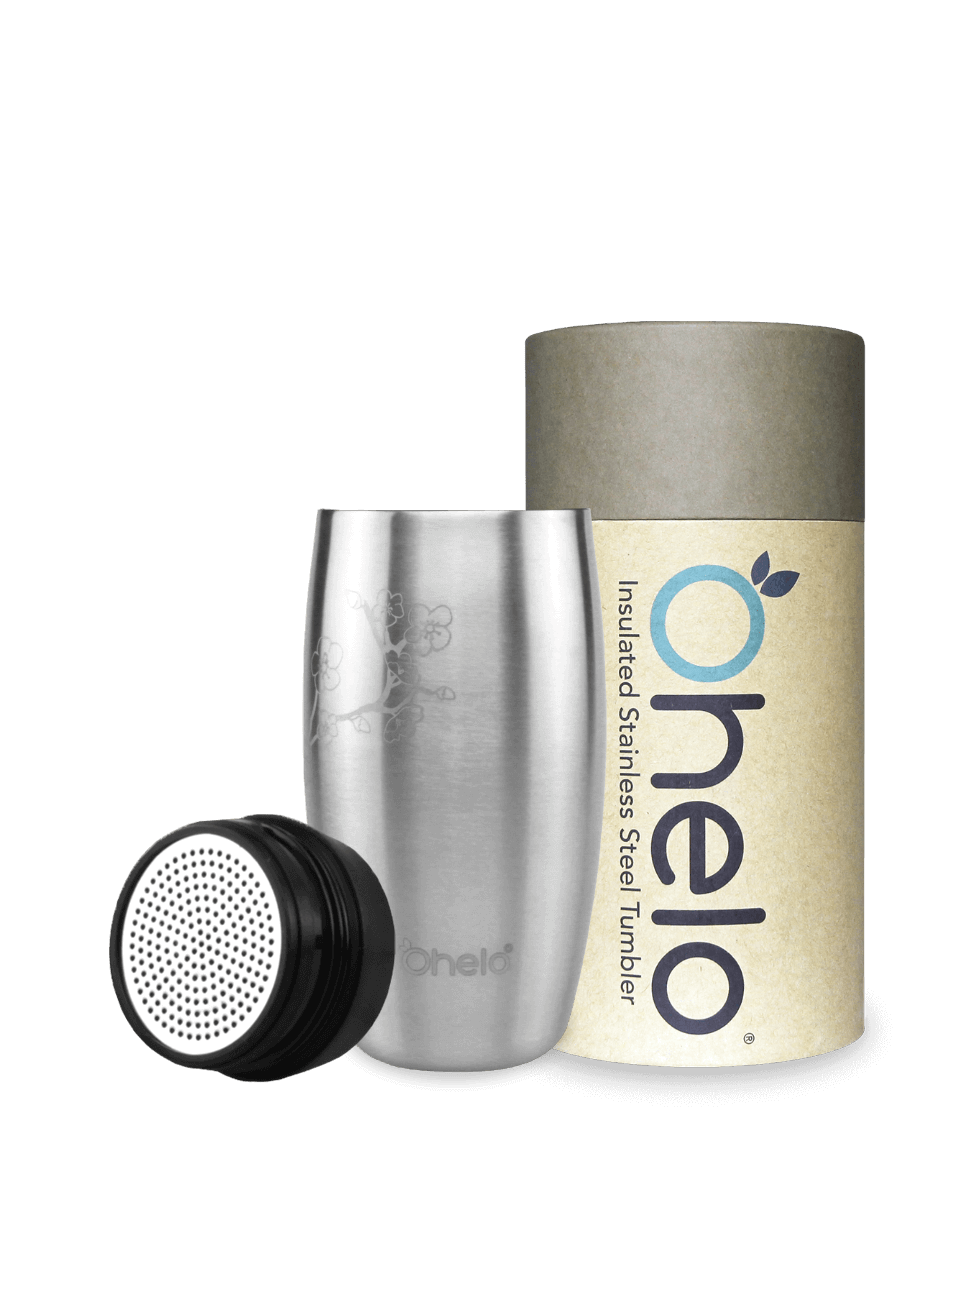 Ohelo insulated tumbler in stainless steel with cherry blossom design with recycled packaging